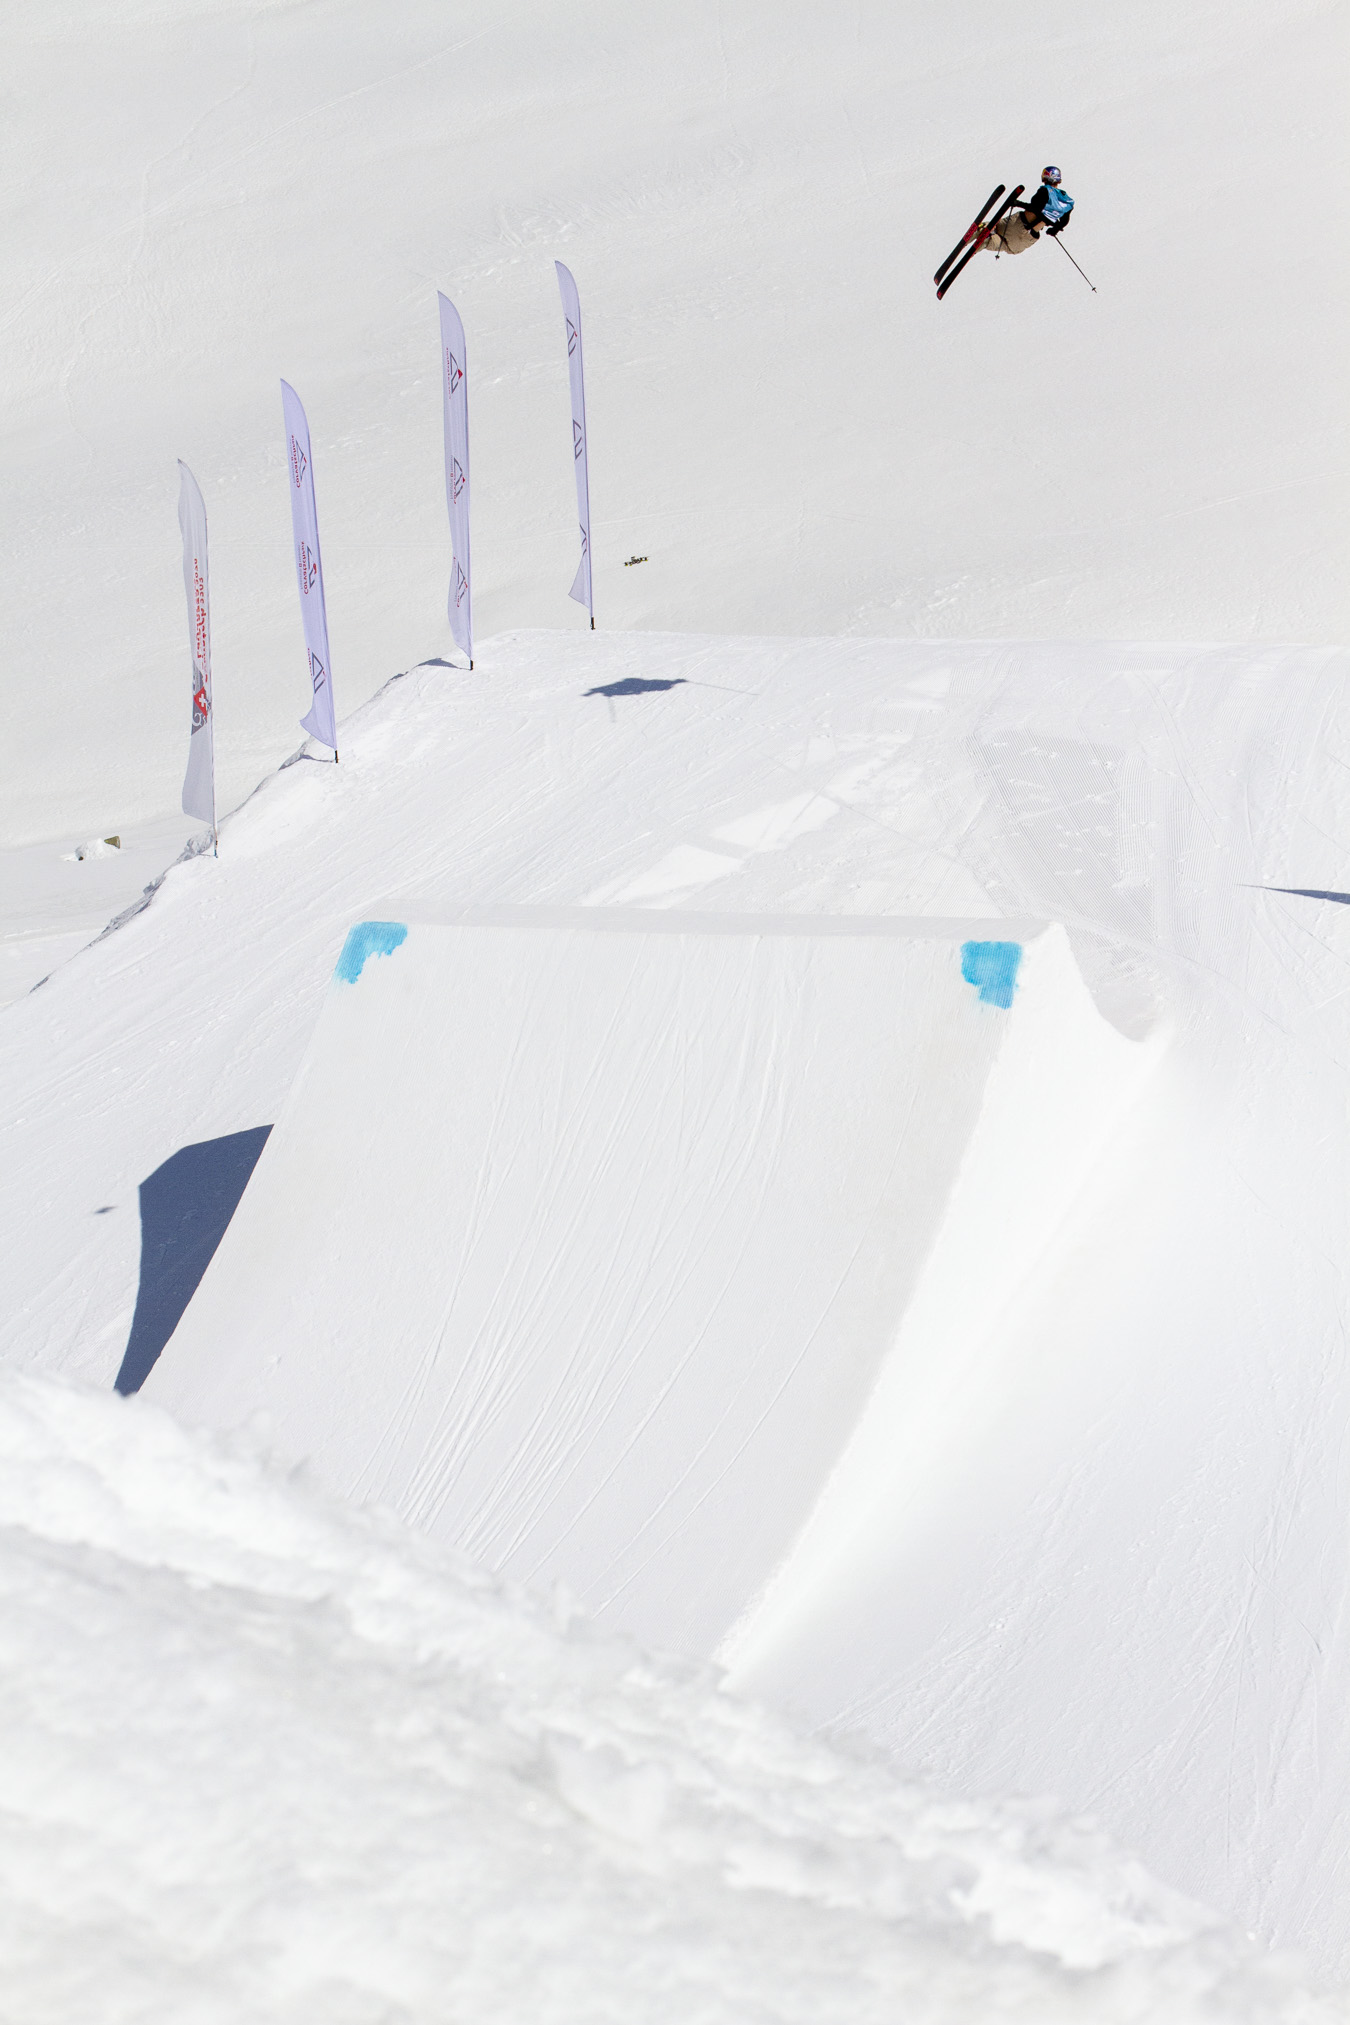 Mac Forehand at the 2022 Freeski World Cup slopestyle in Corvatsch